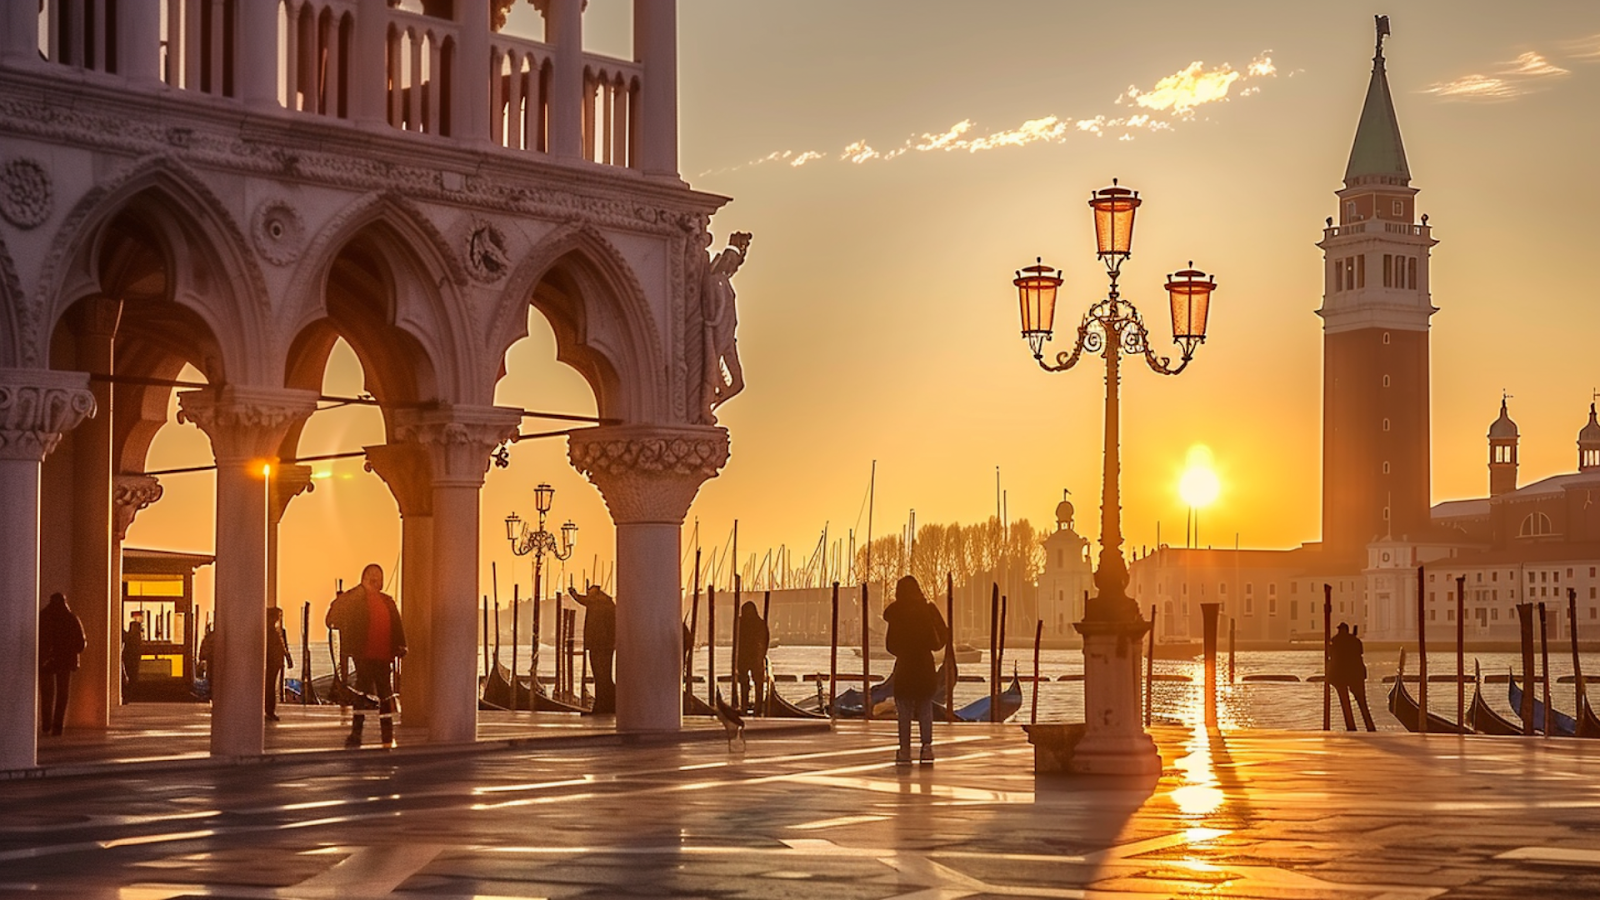 The sun setting at Piazza San Marco in Venice